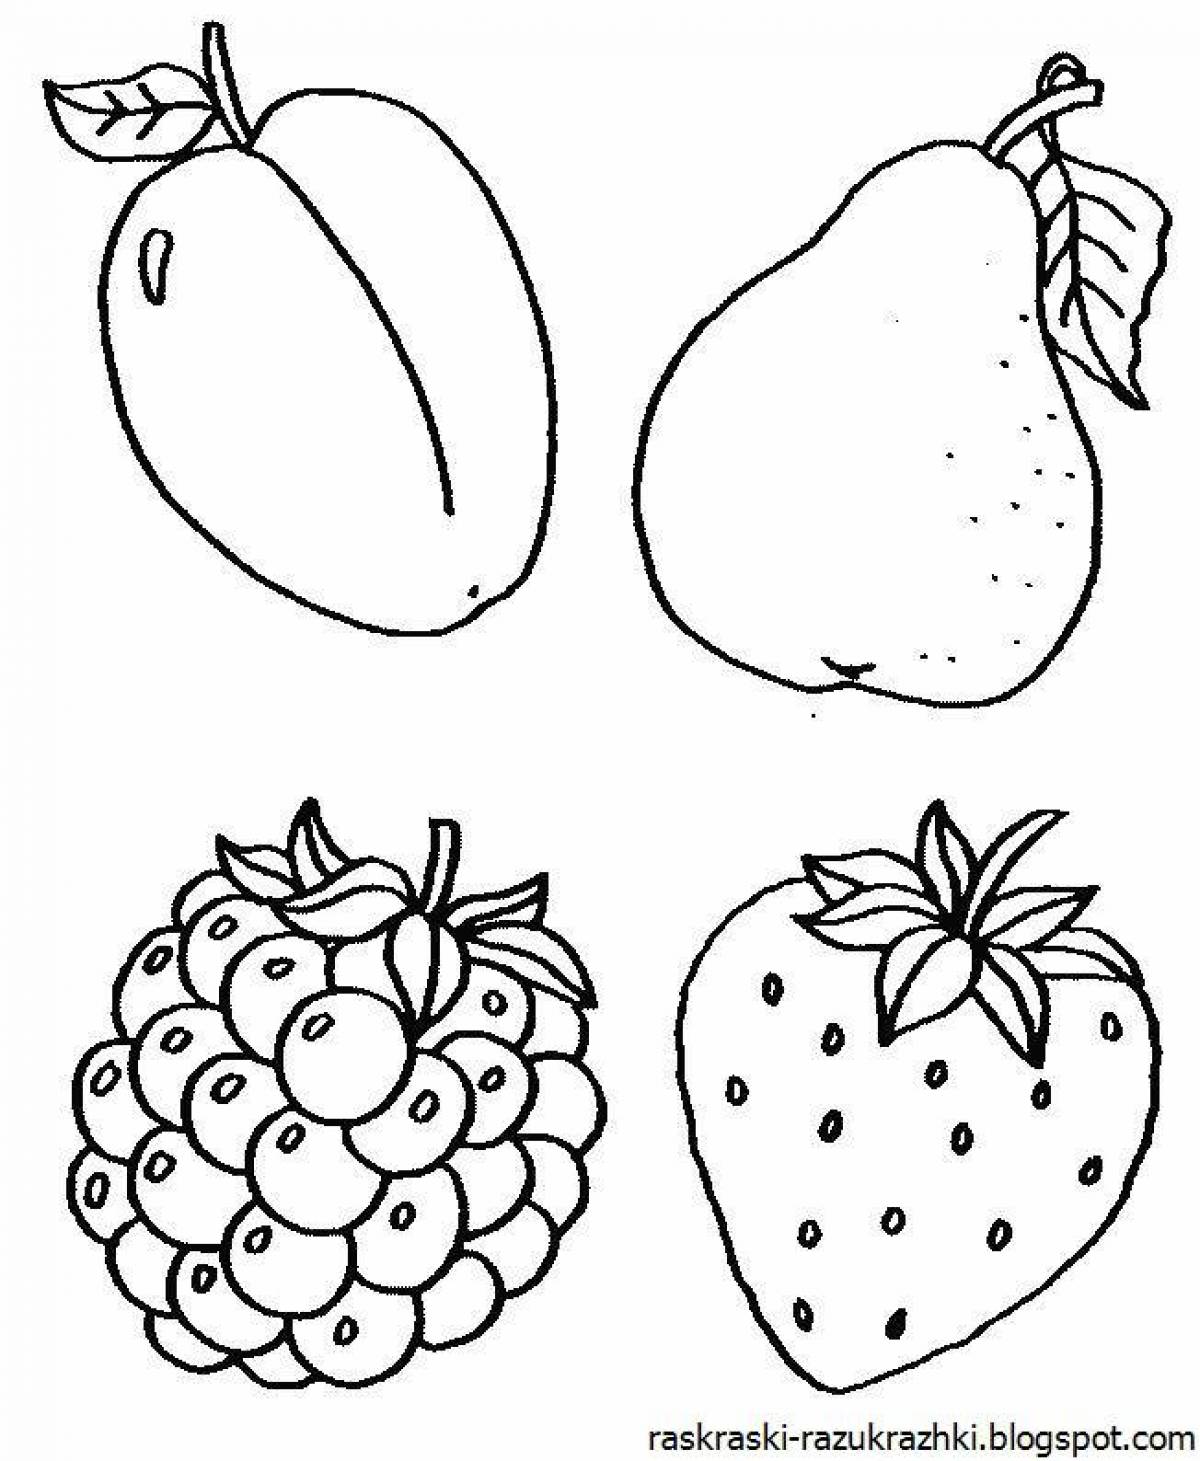 Coloring book shining vegetable